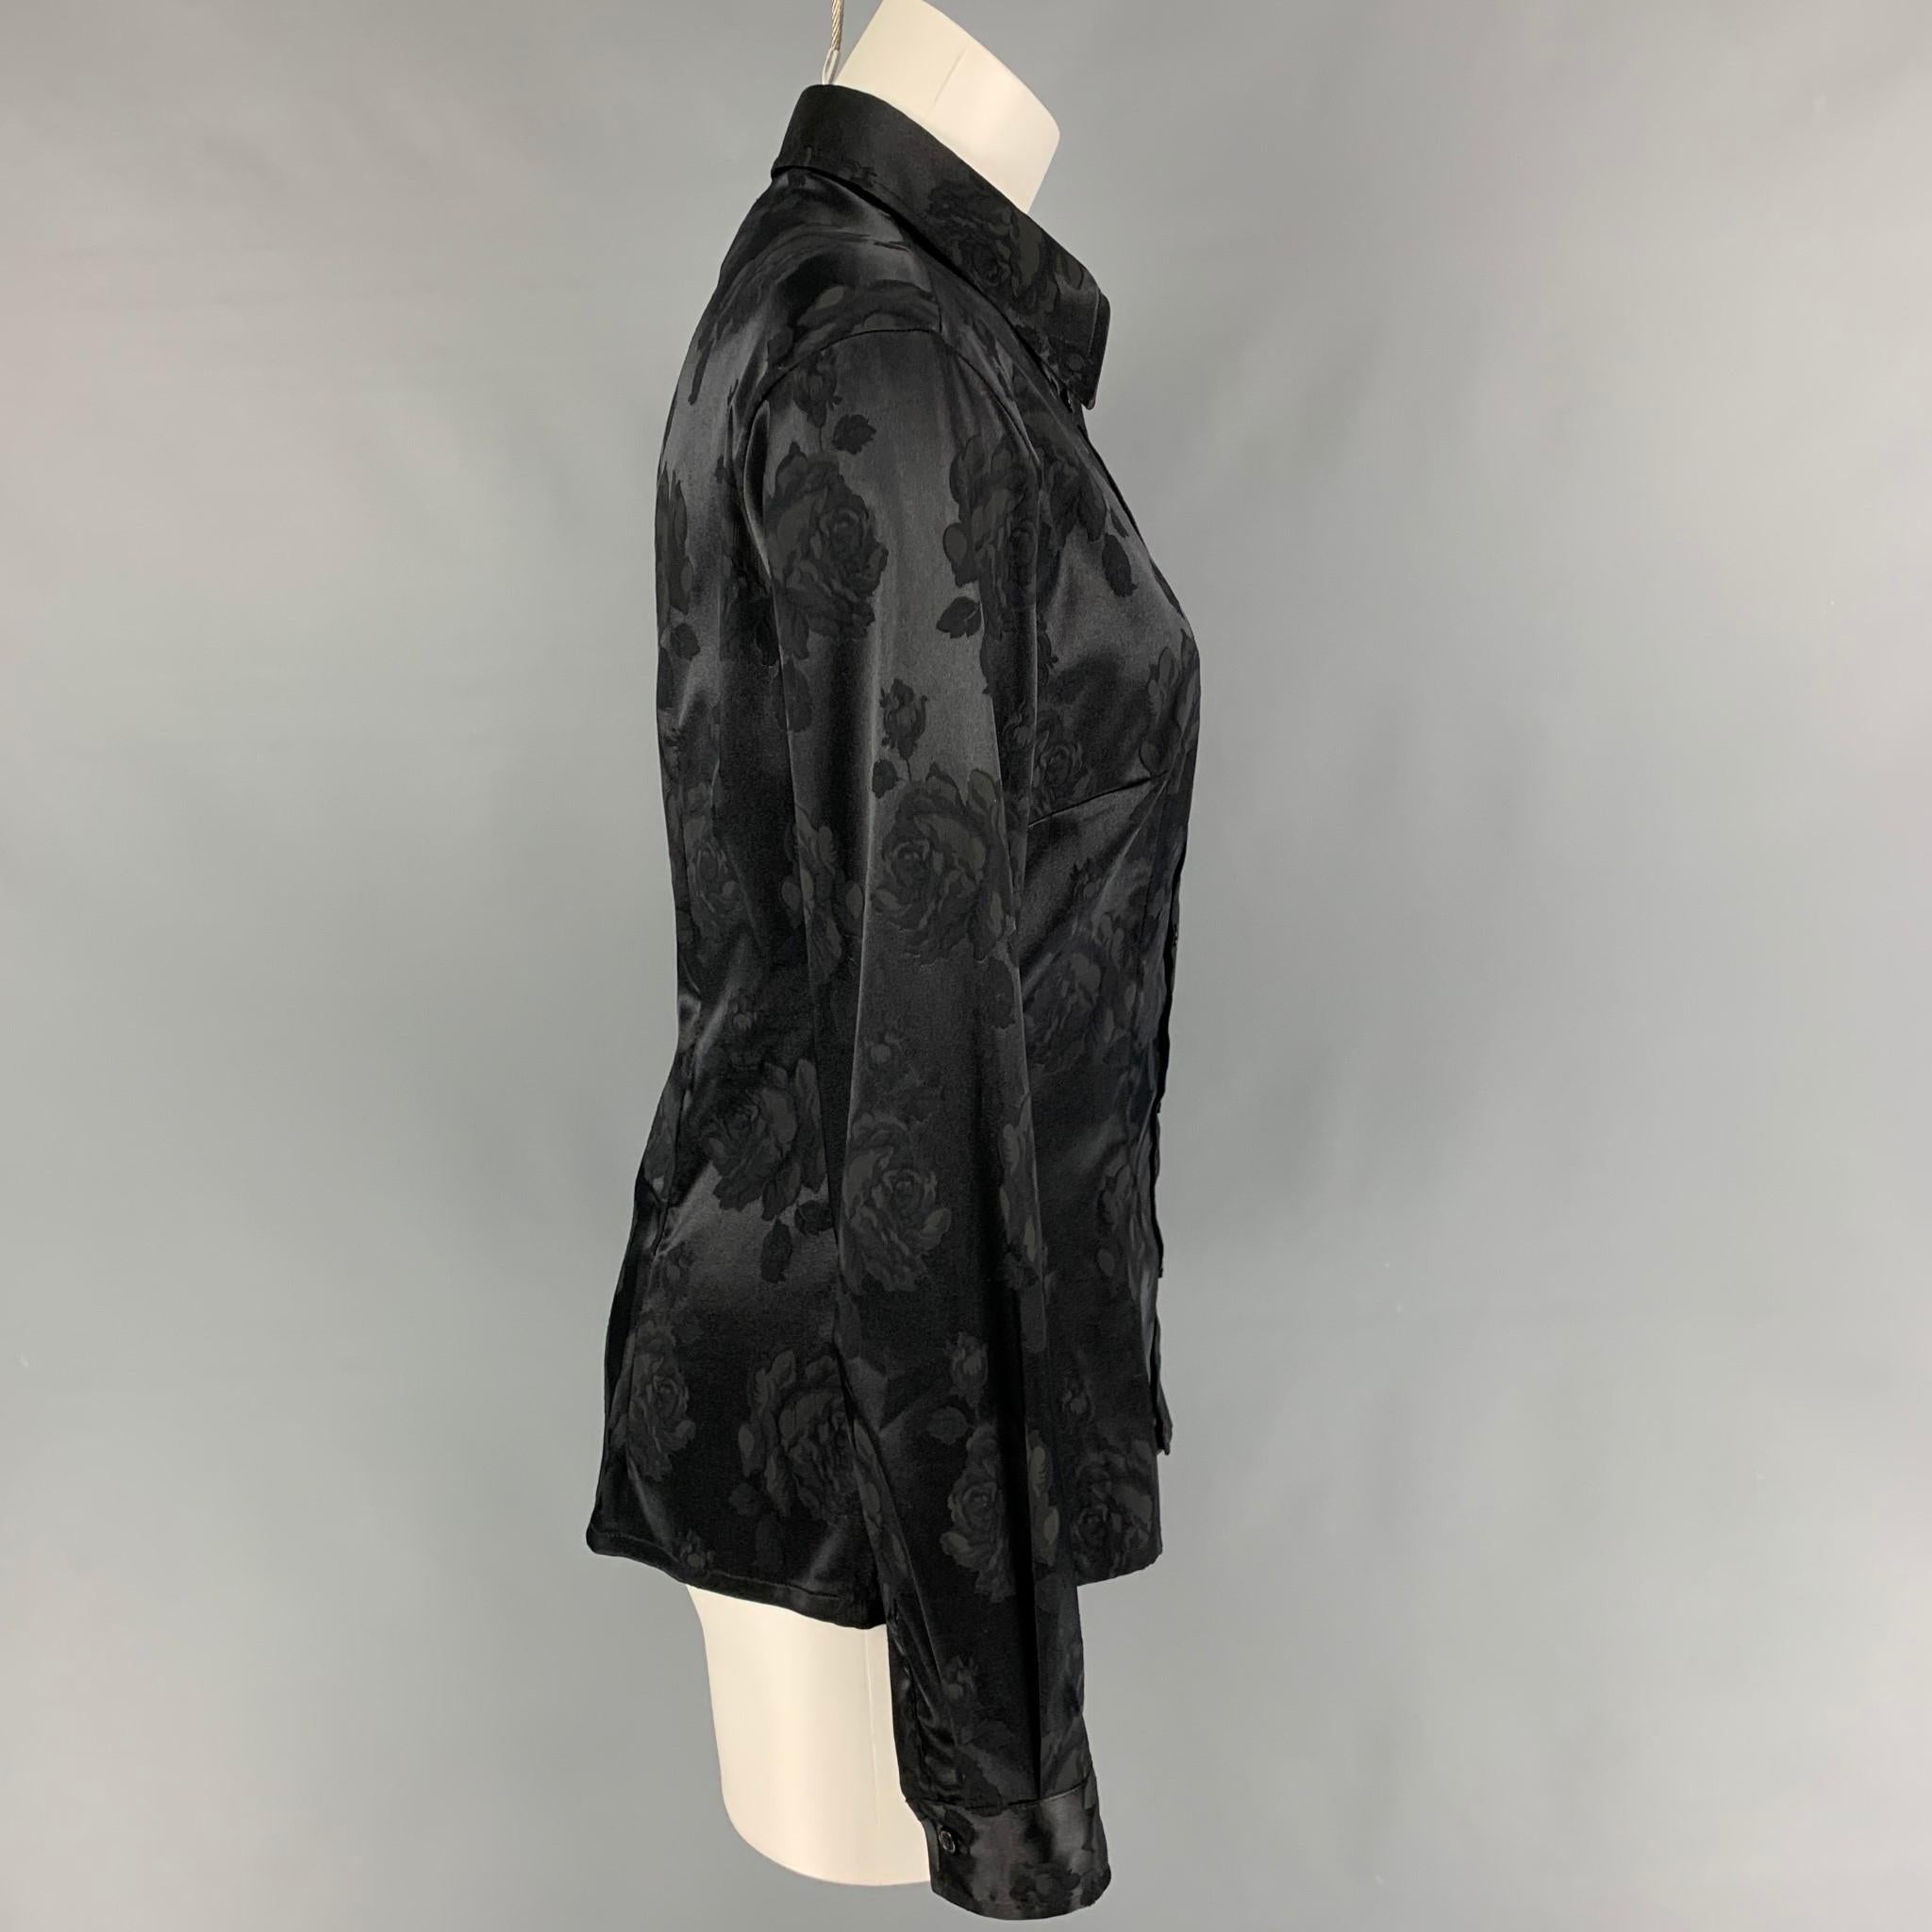 D&G by DOLCE & GABBANA shirt comes in a black jacquard polyester featuring a spread collar and a button up closure. Made in Italy. 

Very Good Pre-Owned Condition.
Marked: 30/44

Measurements:

Shoulder: 17 in.
Bust: 36 in.
Sleeve: 25 in.
Length: 25